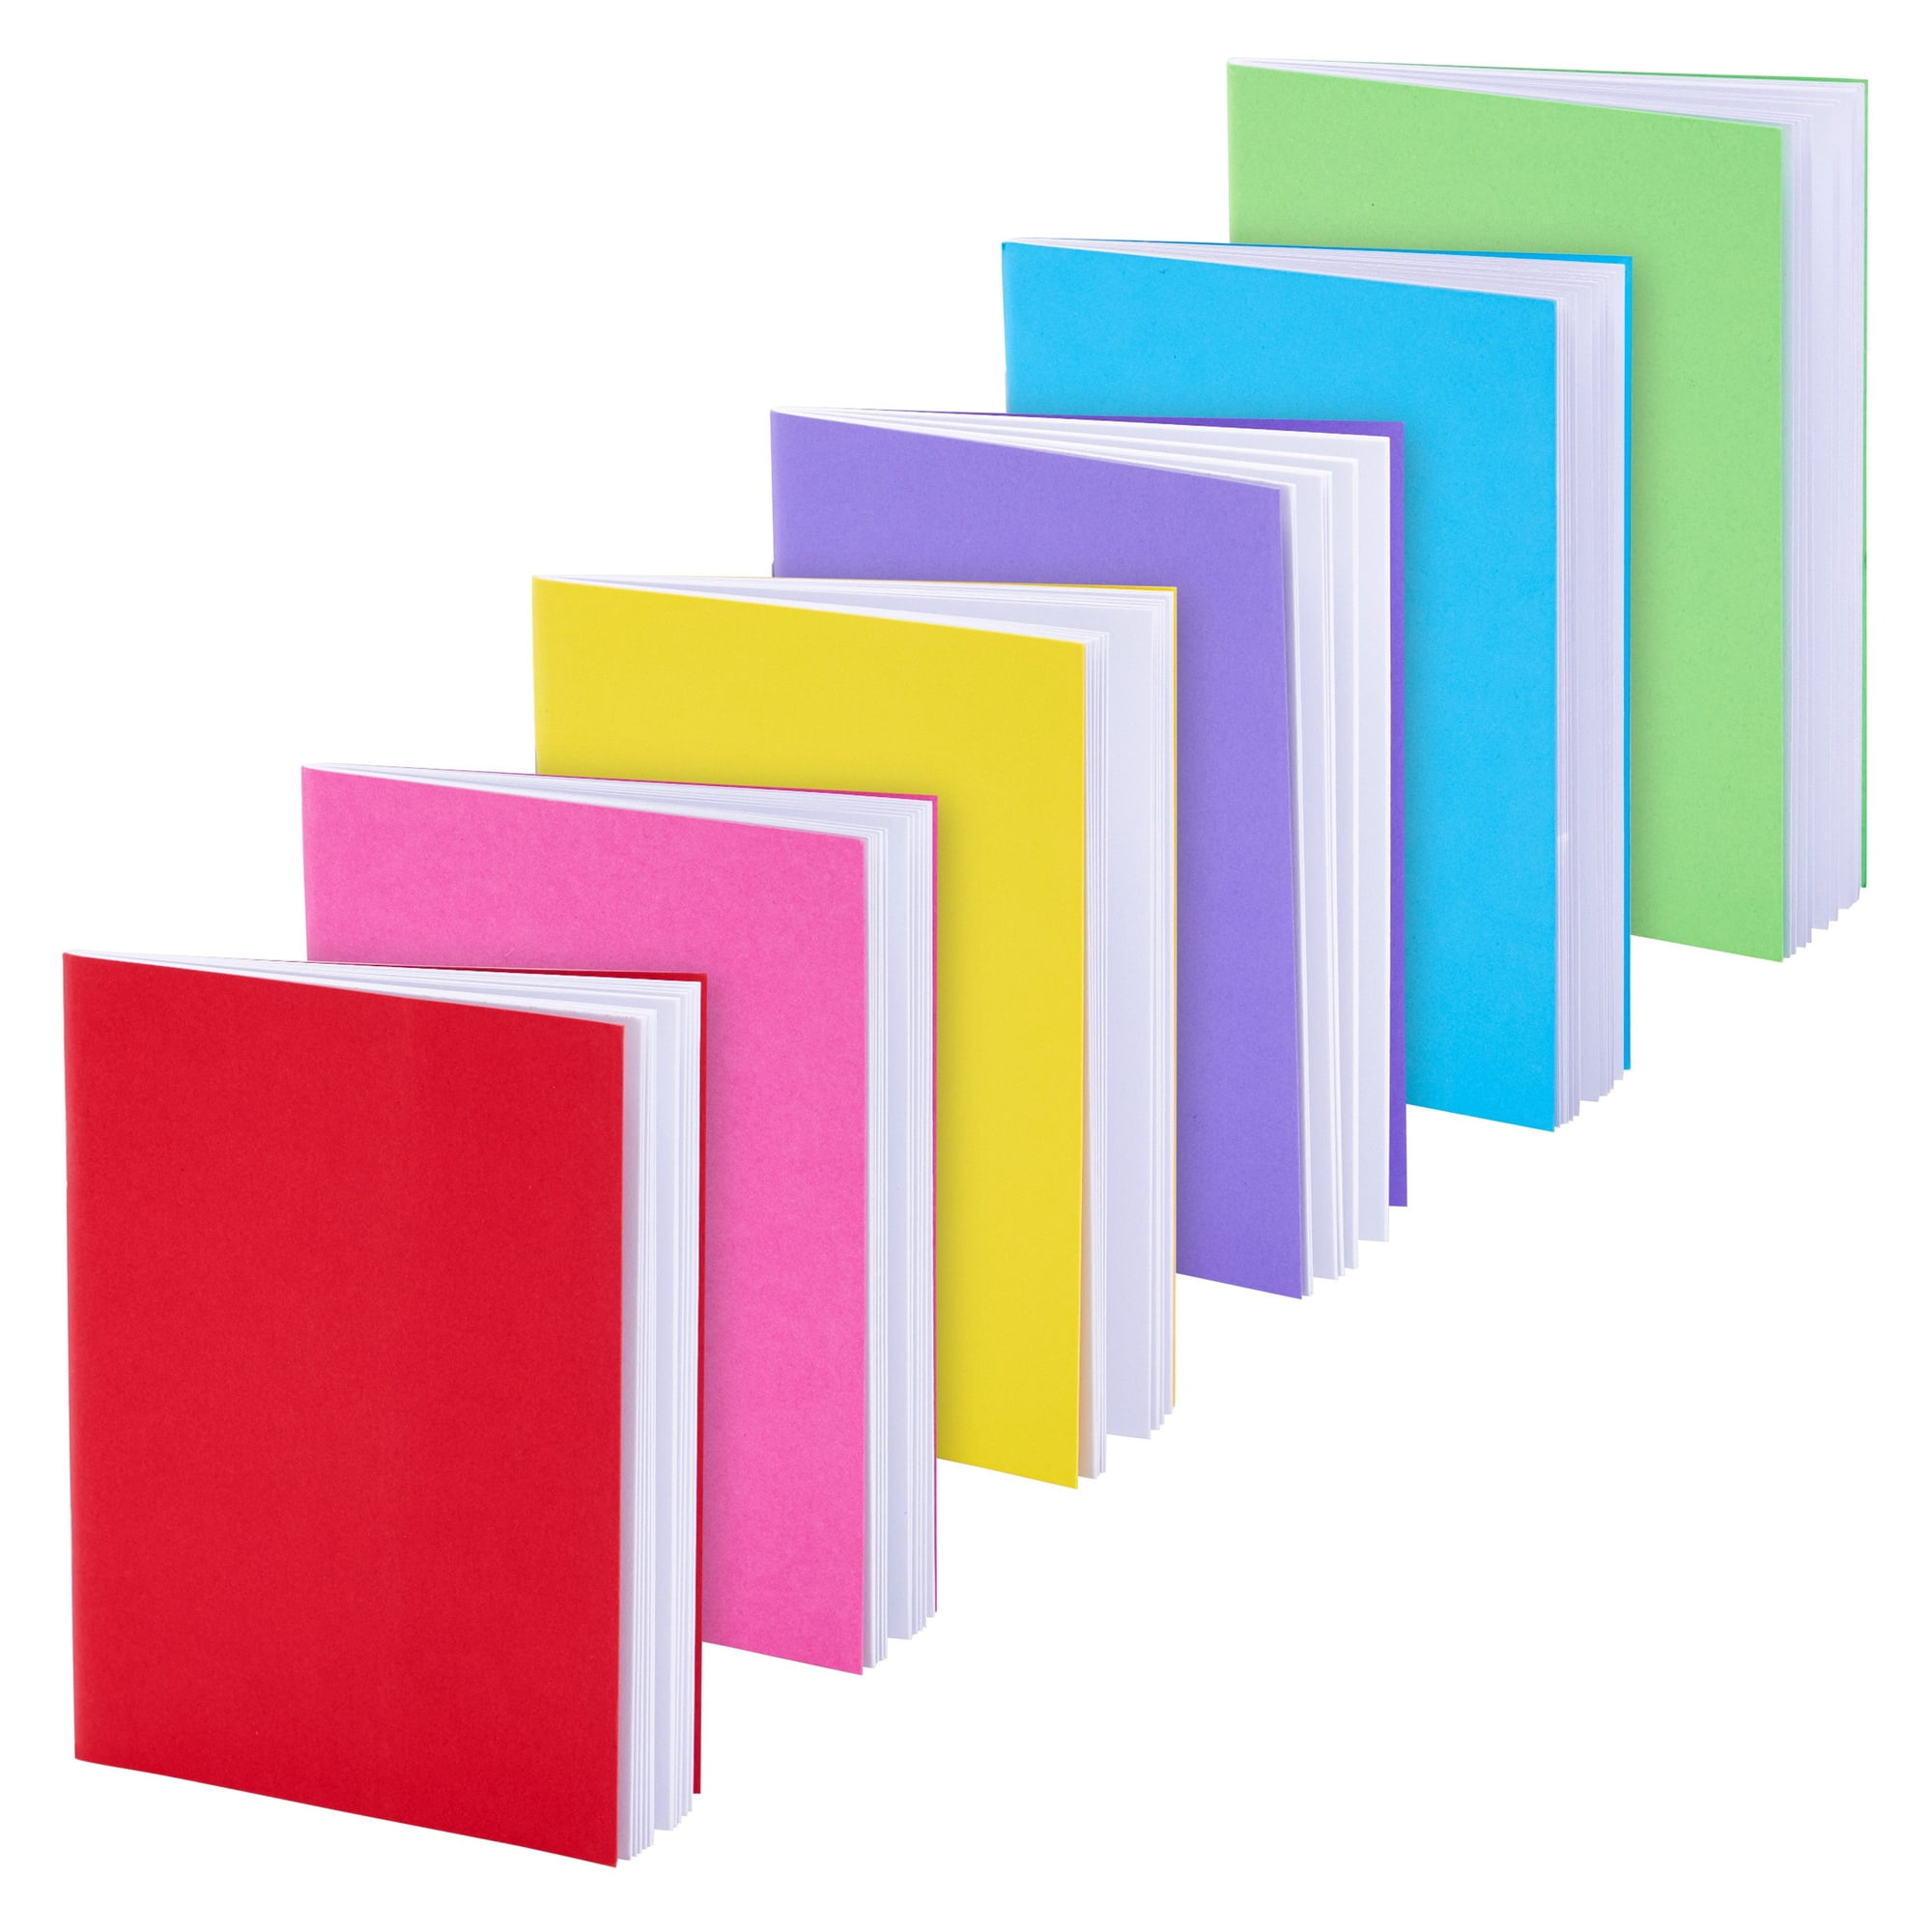 BLANK BOOKS FOR KIDS TO WRITE STORIES: 30 Pages A5 Size (5.8x8.3) Blank  Books Children Notebook for Drawing, Writing, Journaling And More (Blank  Book For Kids…